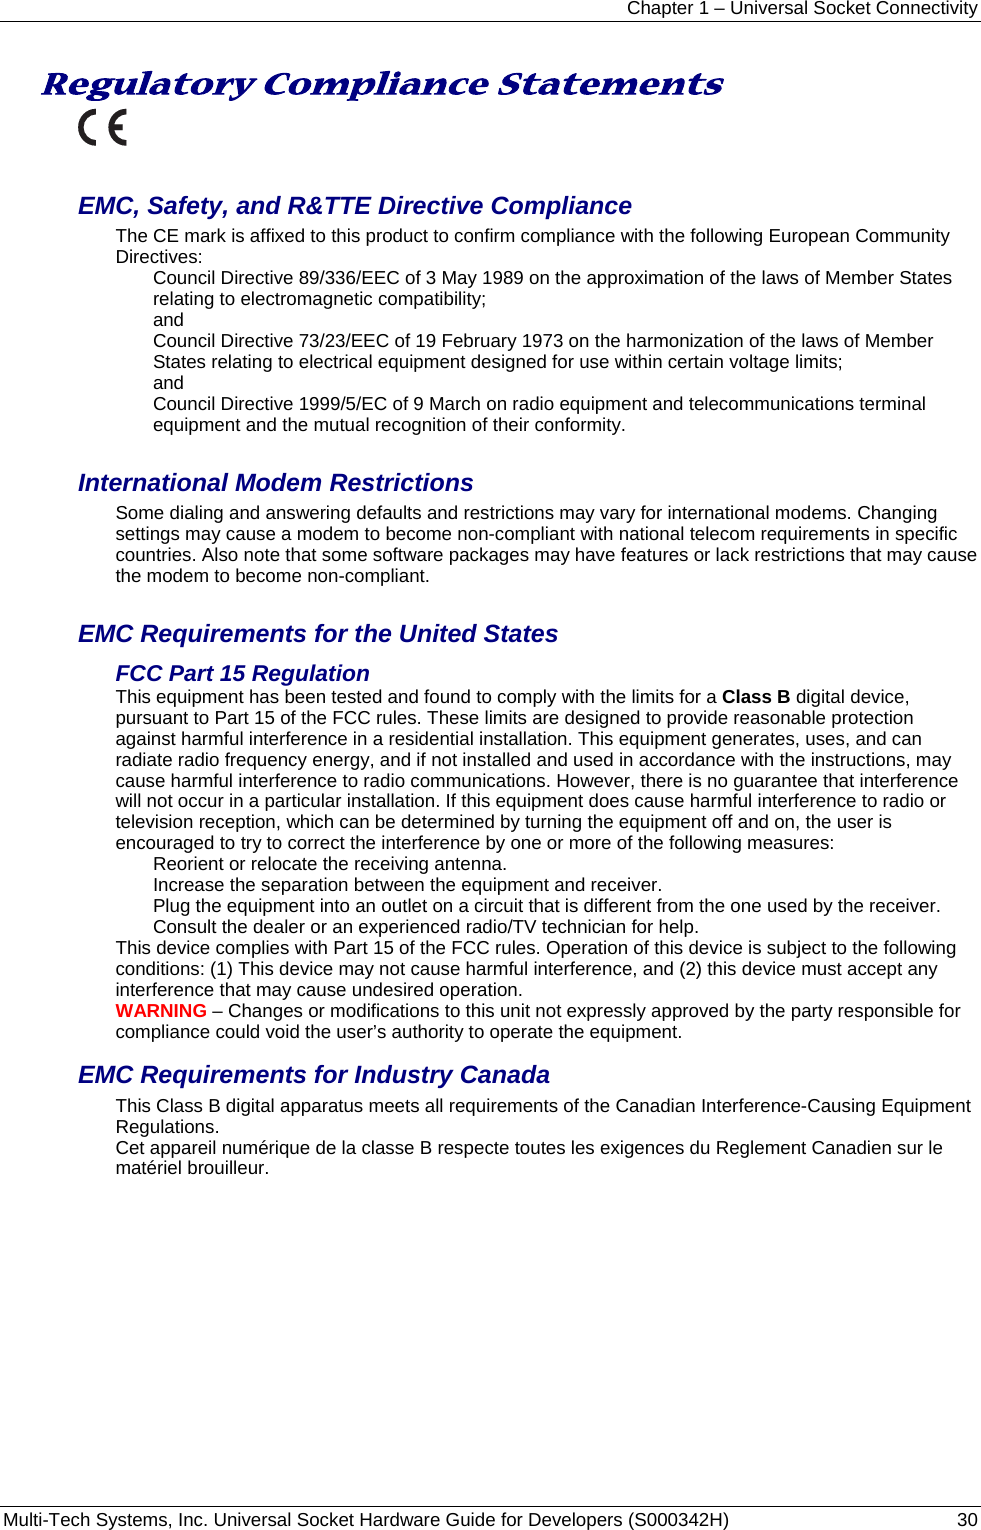 Chapter 1 – Universal Socket Connectivity Multi-Tech Systems, Inc. Universal Socket Hardware Guide for Developers (S000342H)  30  Regulatory Compliance Statements   EMC, Safety, and R&amp;TTE Directive Compliance The CE mark is affixed to this product to confirm compliance with the following European Community Directives: Council Directive 89/336/EEC of 3 May 1989 on the approximation of the laws of Member States relating to electromagnetic compatibility;  and Council Directive 73/23/EEC of 19 February 1973 on the harmonization of the laws of Member States relating to electrical equipment designed for use within certain voltage limits; and Council Directive 1999/5/EC of 9 March on radio equipment and telecommunications terminal equipment and the mutual recognition of their conformity.   International Modem Restrictions Some dialing and answering defaults and restrictions may vary for international modems. Changing settings may cause a modem to become non-compliant with national telecom requirements in specific countries. Also note that some software packages may have features or lack restrictions that may cause the modem to become non-compliant.  EMC Requirements for the United States FCC Part 15 Regulation This equipment has been tested and found to comply with the limits for a Class B digital device, pursuant to Part 15 of the FCC rules. These limits are designed to provide reasonable protection against harmful interference in a residential installation. This equipment generates, uses, and can radiate radio frequency energy, and if not installed and used in accordance with the instructions, may cause harmful interference to radio communications. However, there is no guarantee that interference will not occur in a particular installation. If this equipment does cause harmful interference to radio or television reception, which can be determined by turning the equipment off and on, the user is encouraged to try to correct the interference by one or more of the following measures: Reorient or relocate the receiving antenna. Increase the separation between the equipment and receiver. Plug the equipment into an outlet on a circuit that is different from the one used by the receiver. Consult the dealer or an experienced radio/TV technician for help. This device complies with Part 15 of the FCC rules. Operation of this device is subject to the following conditions: (1) This device may not cause harmful interference, and (2) this device must accept any interference that may cause undesired operation. WARNING – Changes or modifications to this unit not expressly approved by the party responsible for compliance could void the user’s authority to operate the equipment. EMC Requirements for Industry Canada This Class B digital apparatus meets all requirements of the Canadian Interference-Causing Equipment Regulations. Cet appareil numérique de la classe B respecte toutes les exigences du Reglement Canadien sur le matériel brouilleur. 